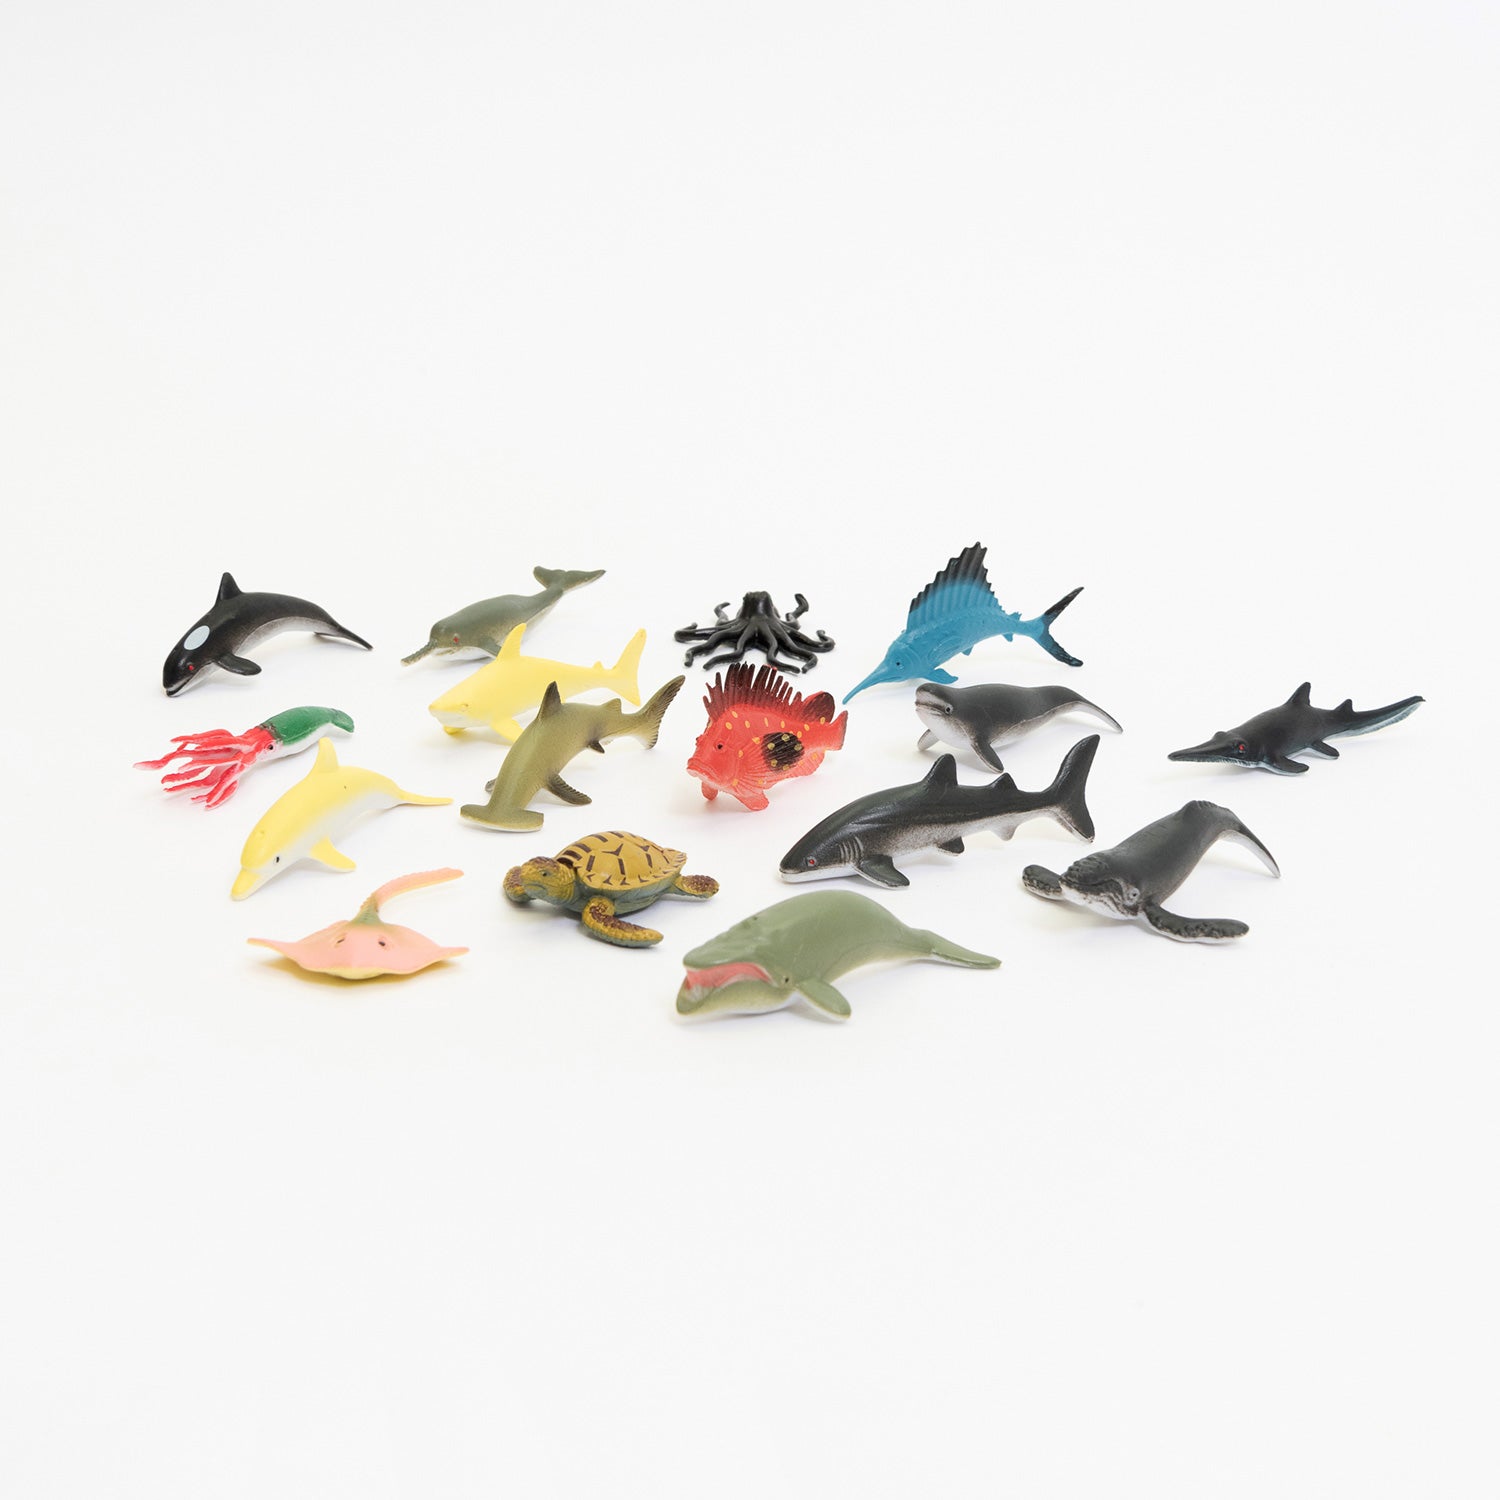 An assortment of 16 colourful ocean animal toys pictured on a white background.